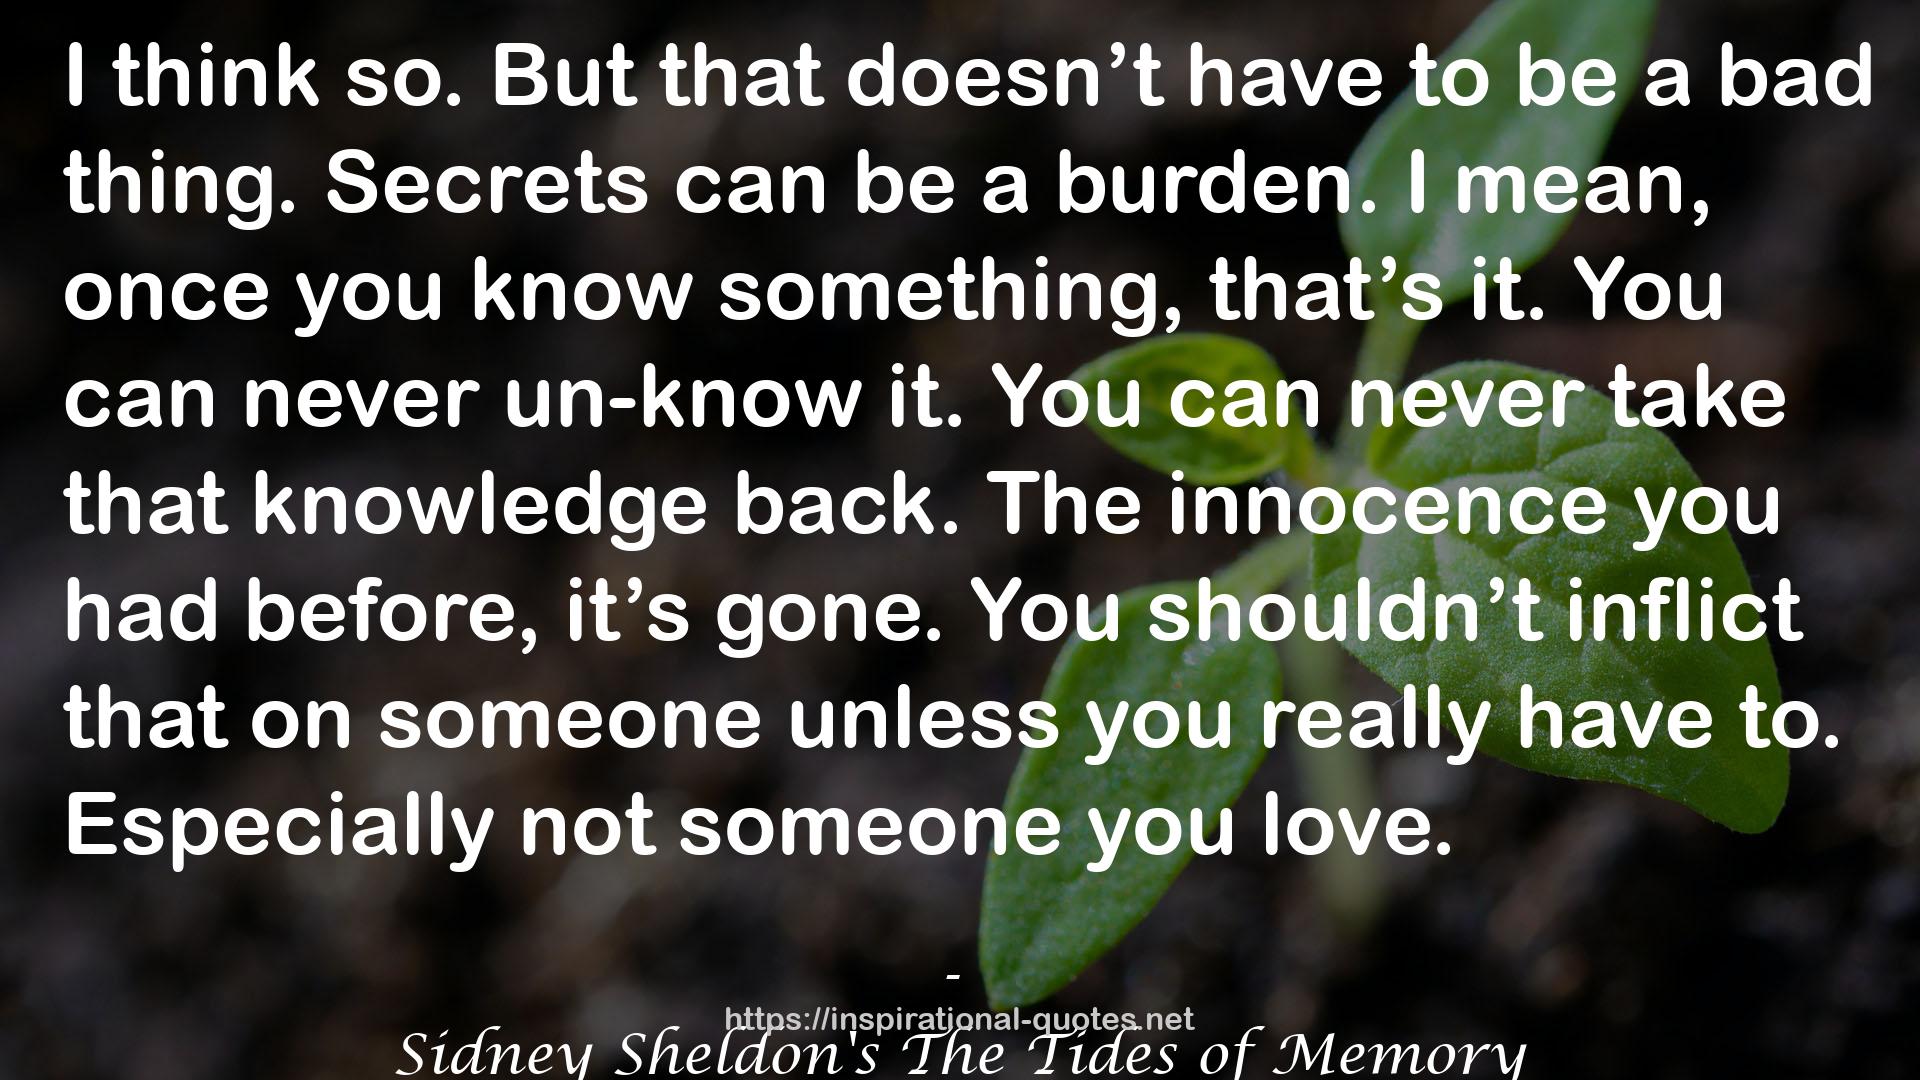 Sidney Sheldon's The Tides of Memory QUOTES